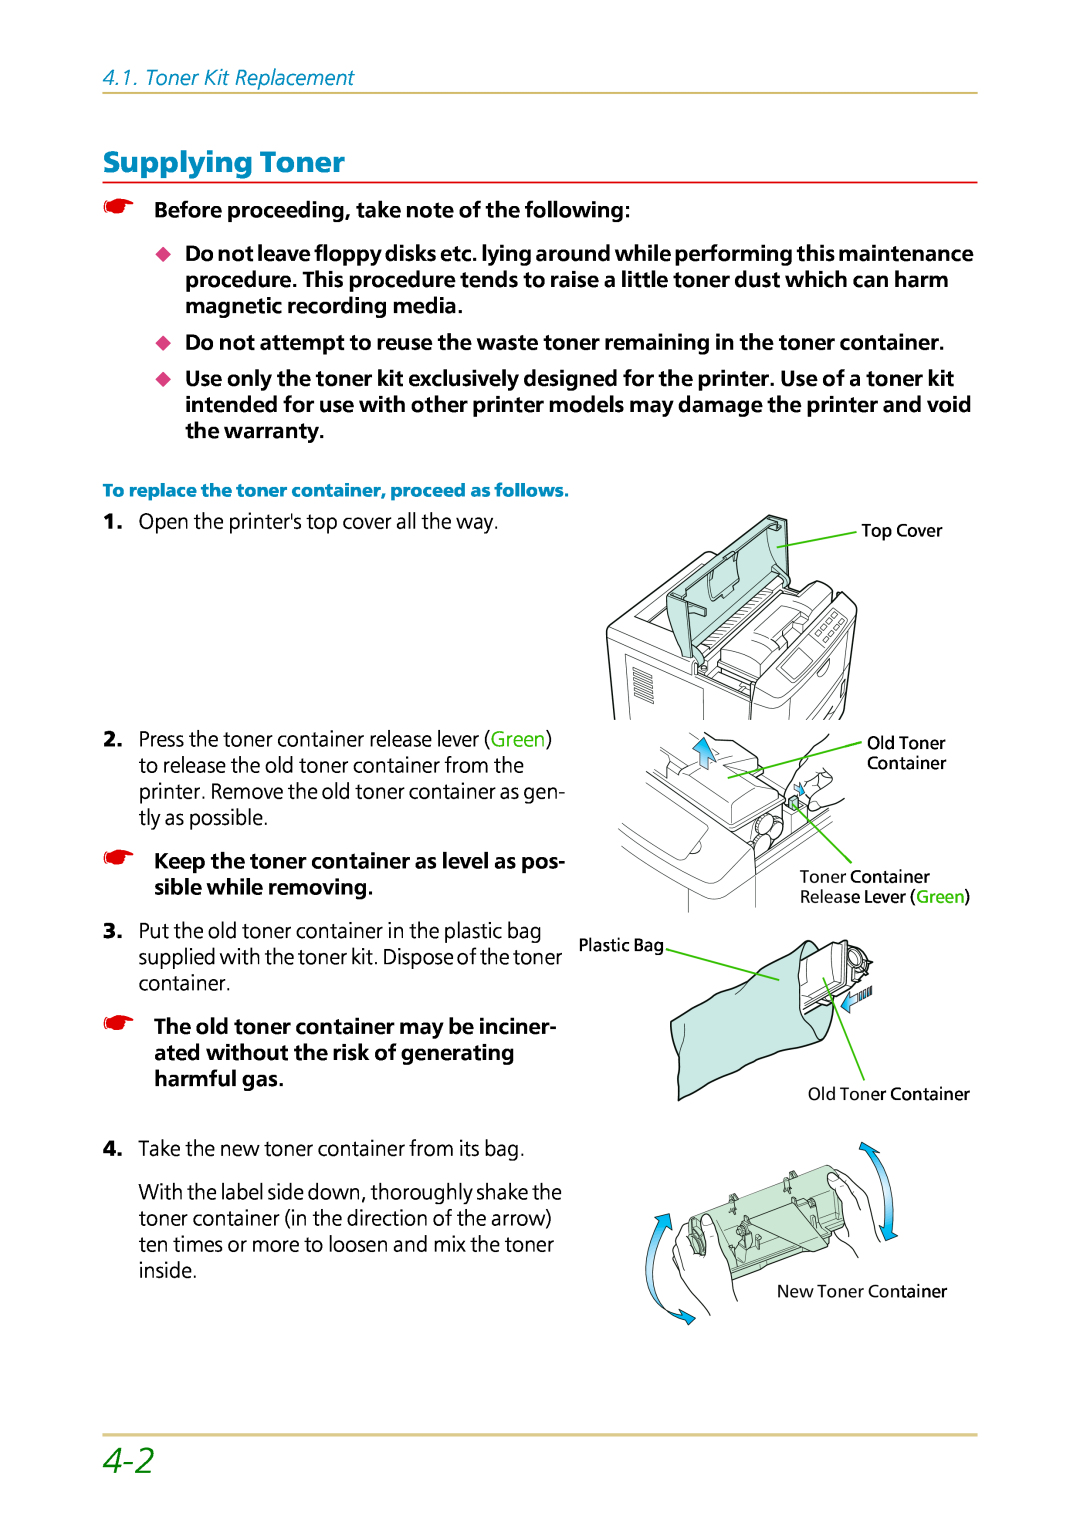 Kyocera FS-1700 user manual Supplying Toner, Toner Kit Replacement, Before proceeding, take note of the following 